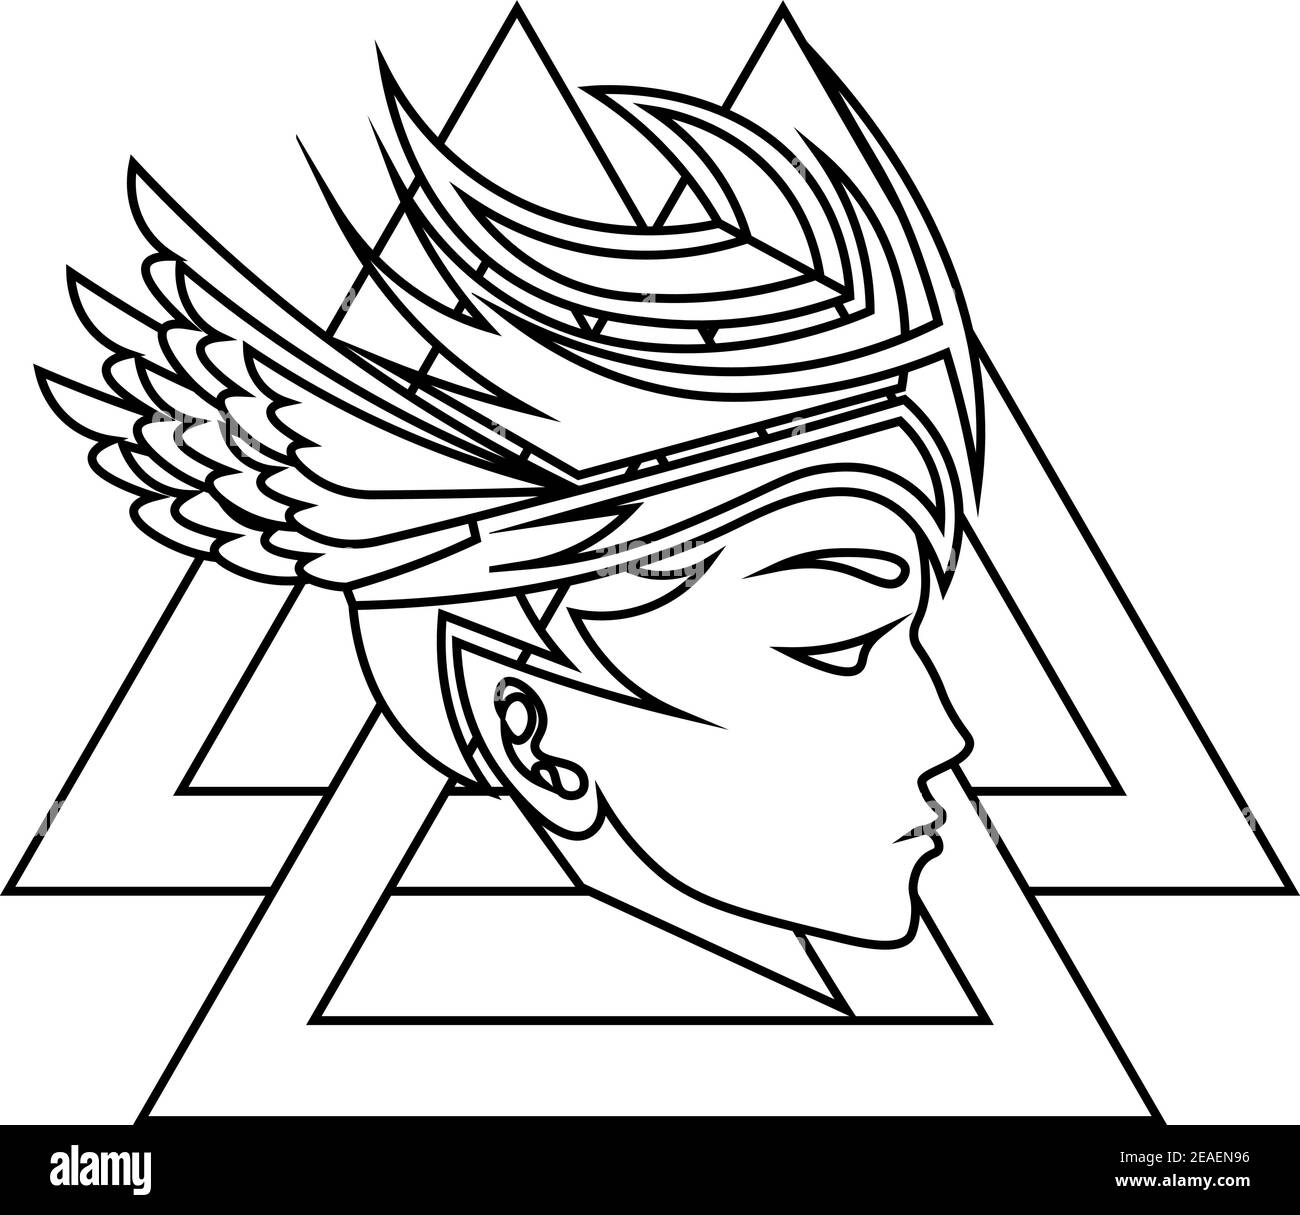 isolated outline valkyrie's face profile on valknut, icon, tattoo or print Stock Vector